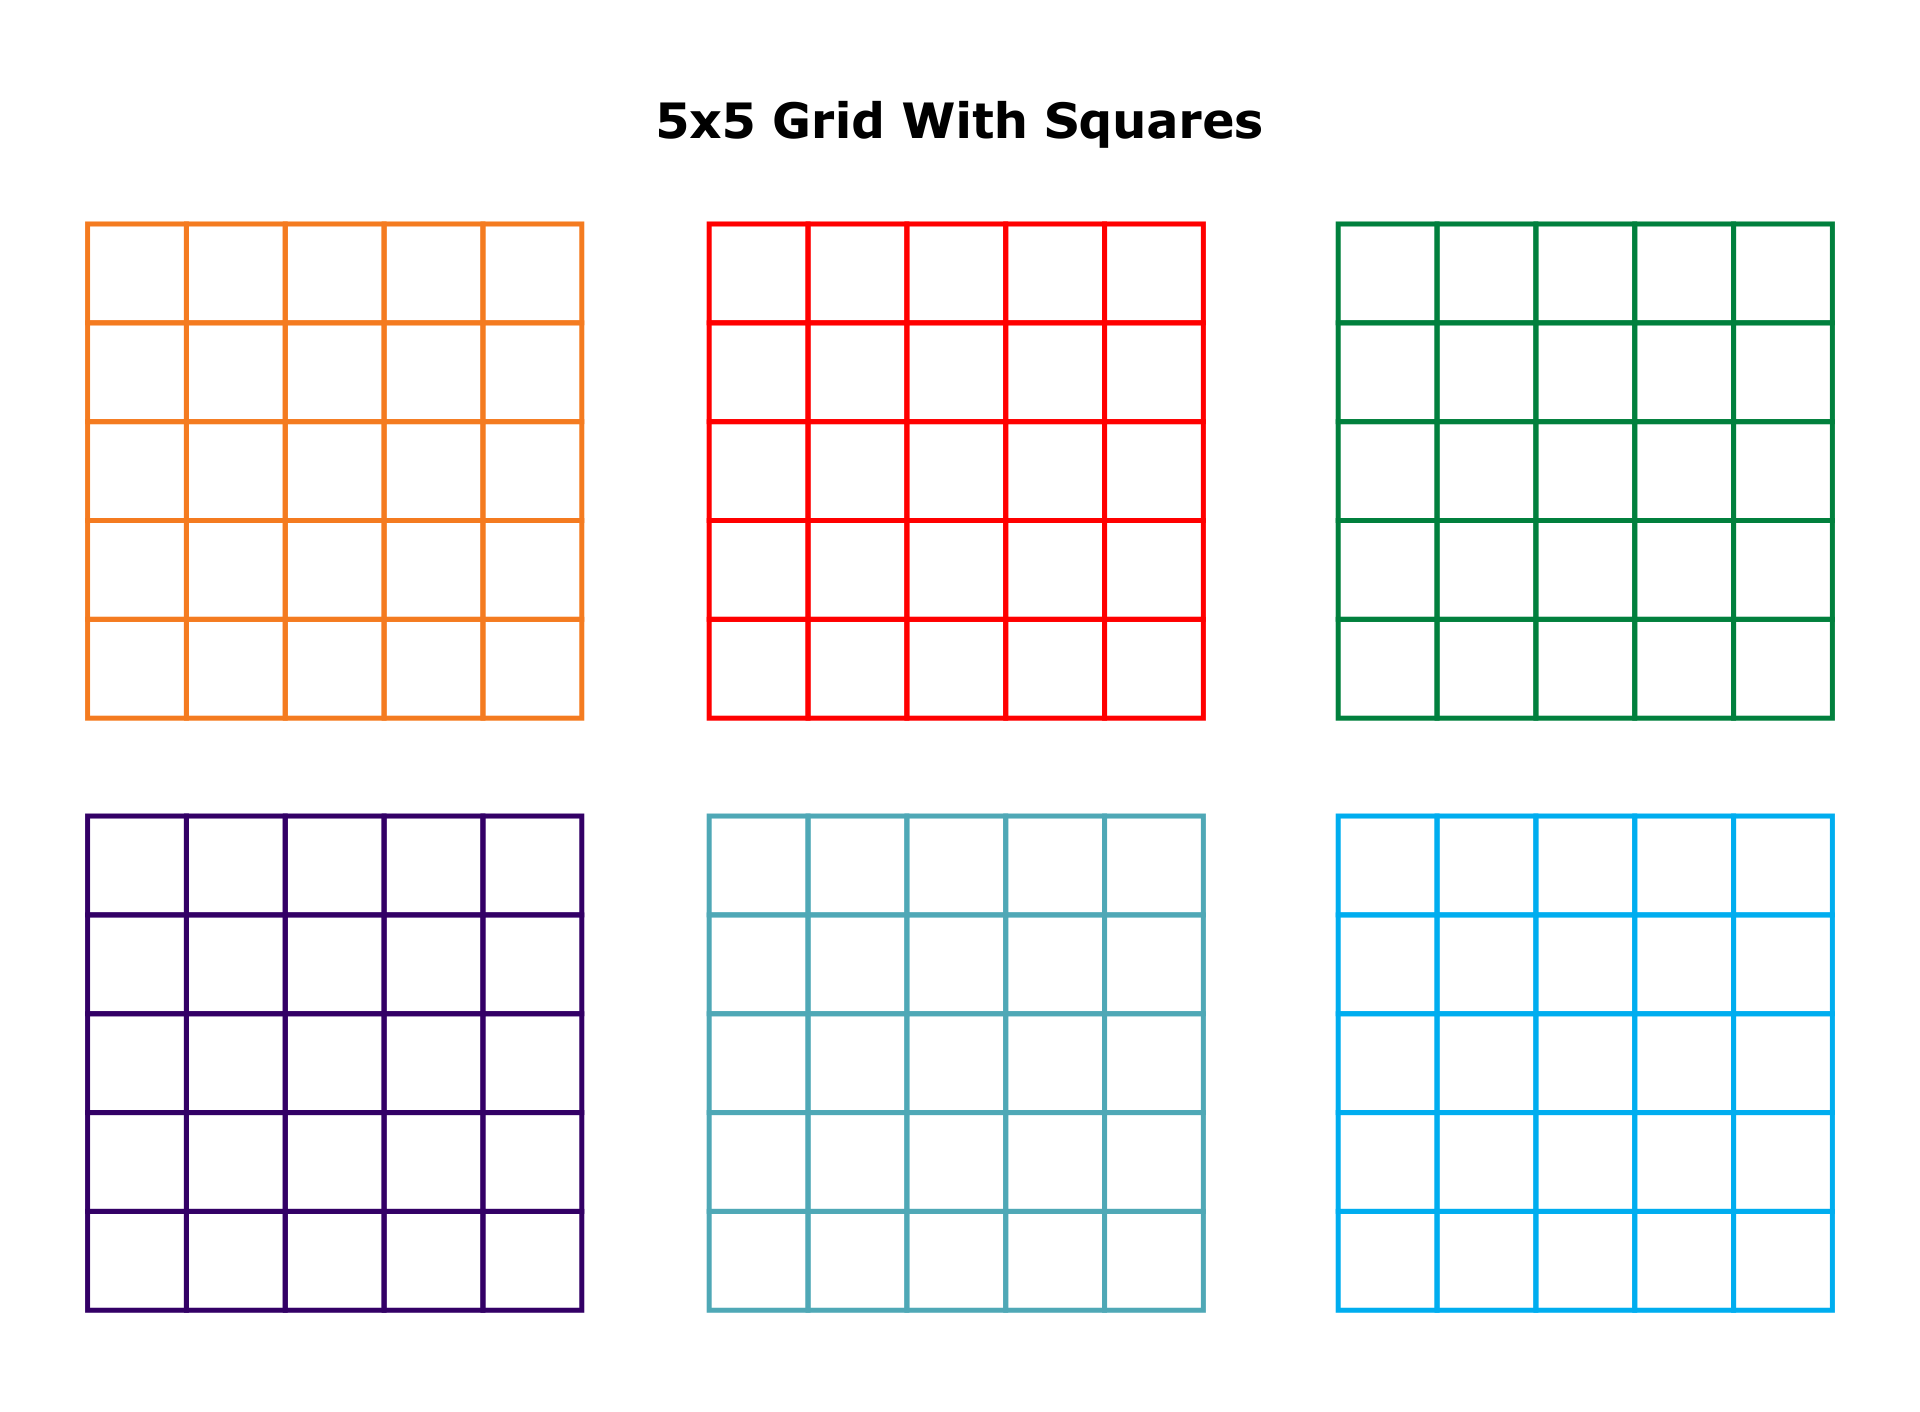 5X5 Grid with Squares